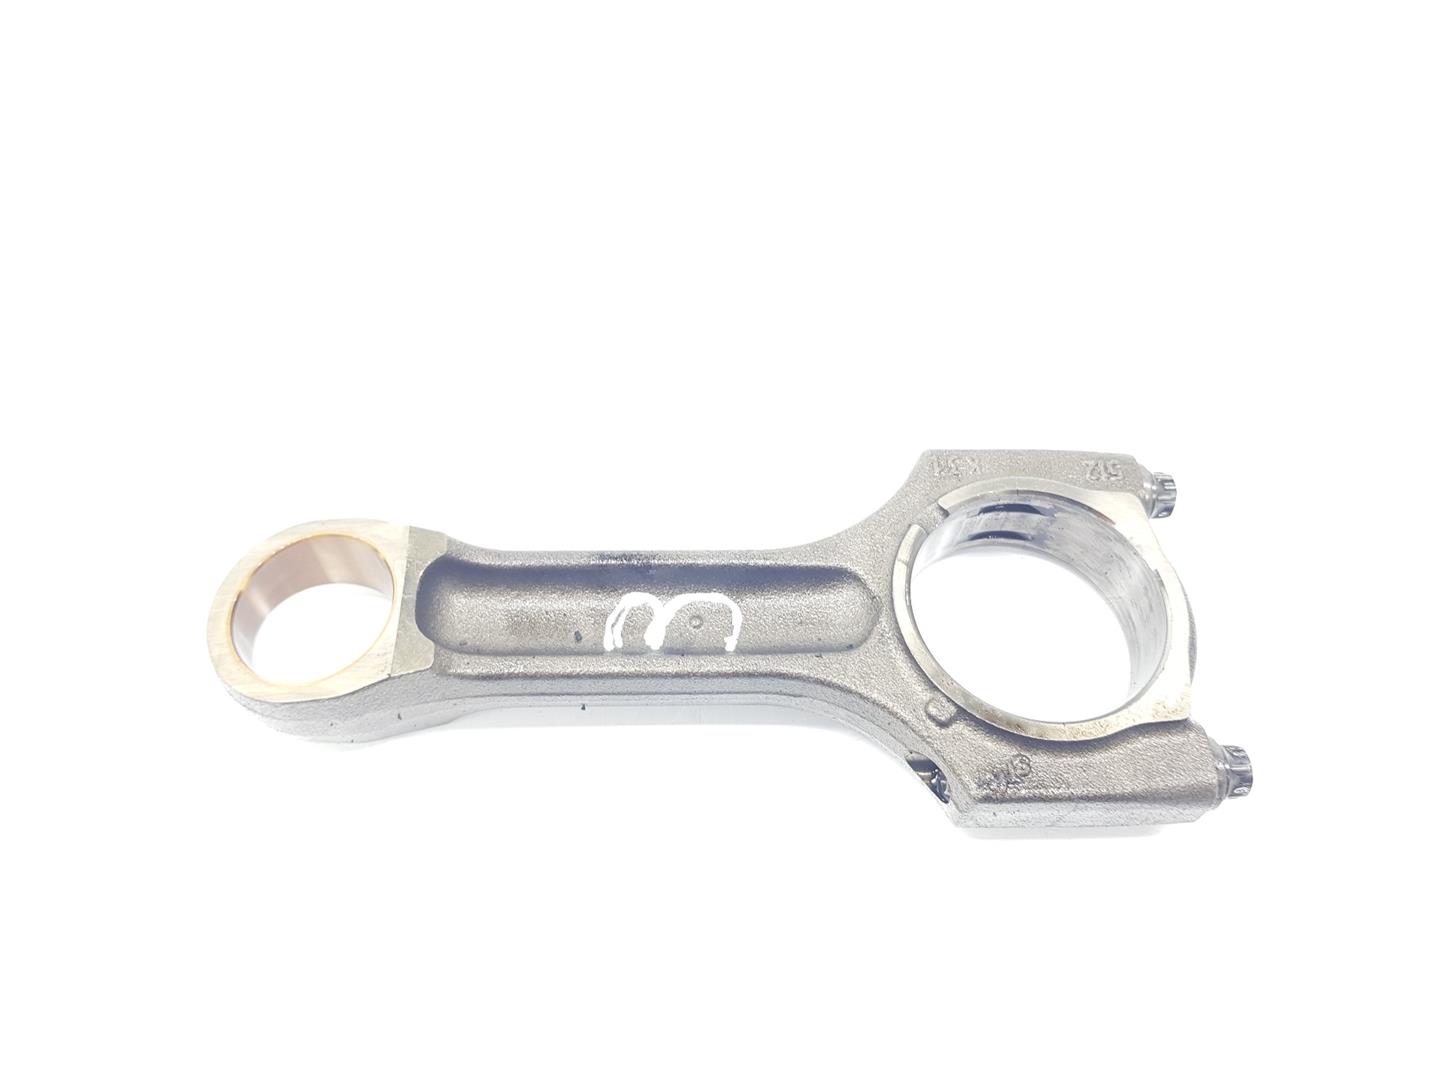 BMW X3 E83 (2003-2010) Connecting Rod 11240308859, 11240308859, 1111AA 24230041